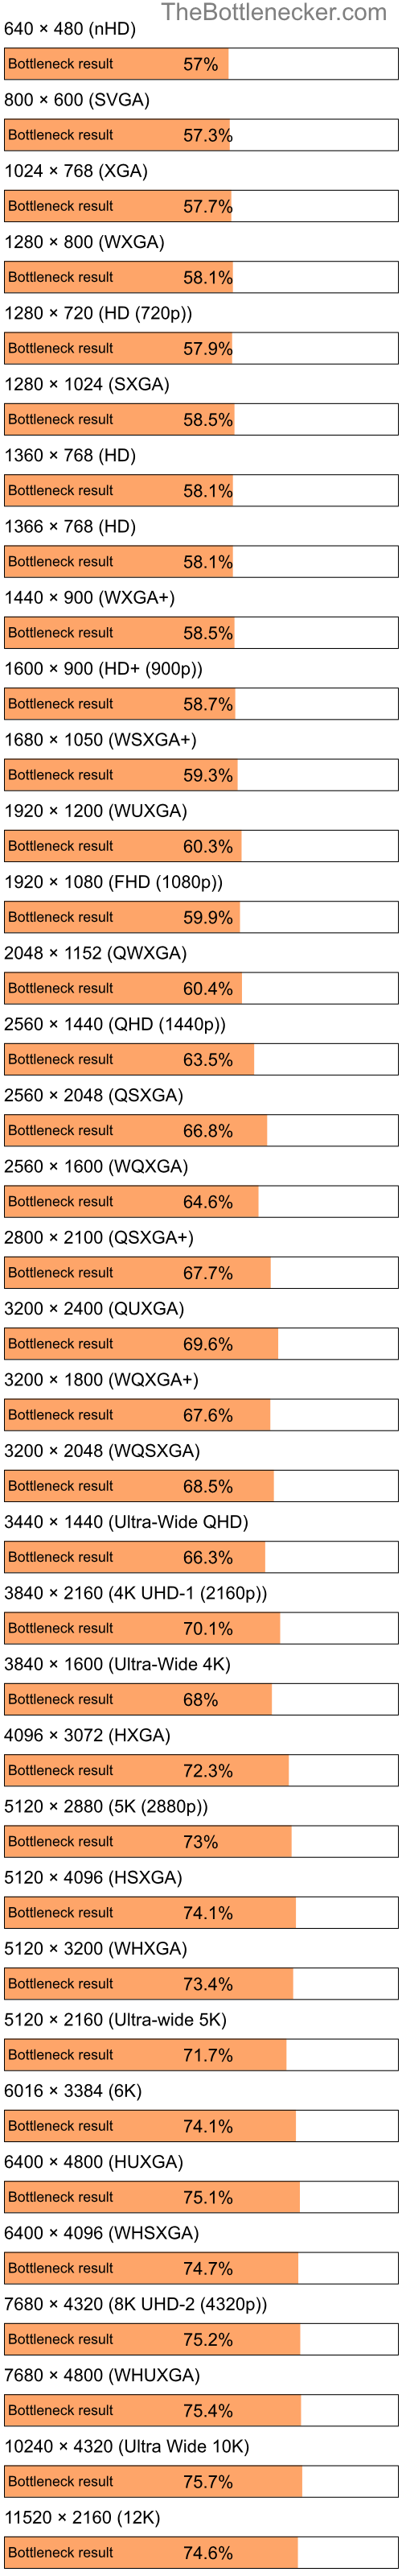 Bottleneck results by resolution for Intel Pentium 4 and NVIDIA GeForce 8600M GT in Processor Intense Tasks